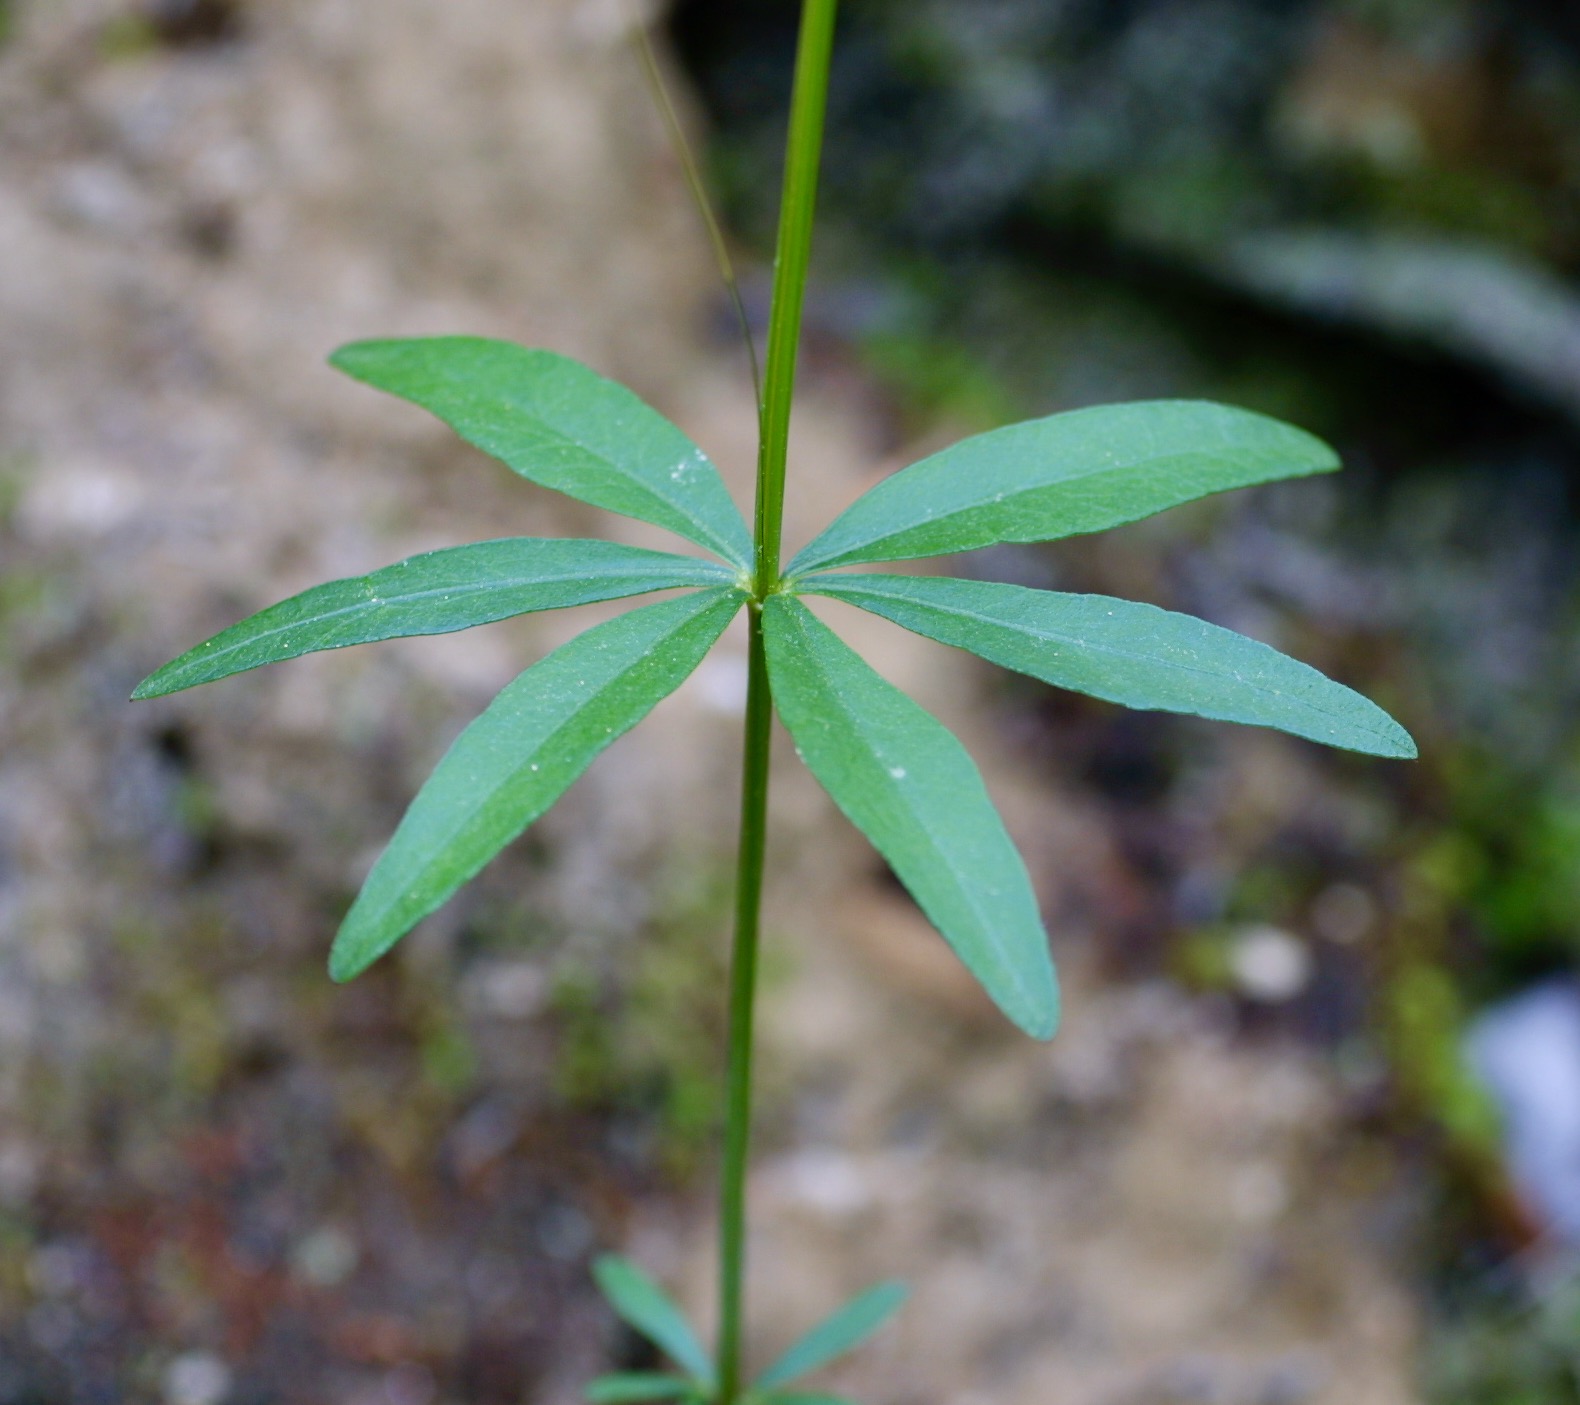 The Scientific Name is Coreopsis major. You will likely hear them called Woodland Coreopsis, Forest Tickseed. This picture shows the Opposite leaves are divided into 3 leaflets, making the leaves appear as if they are whorled of Coreopsis major